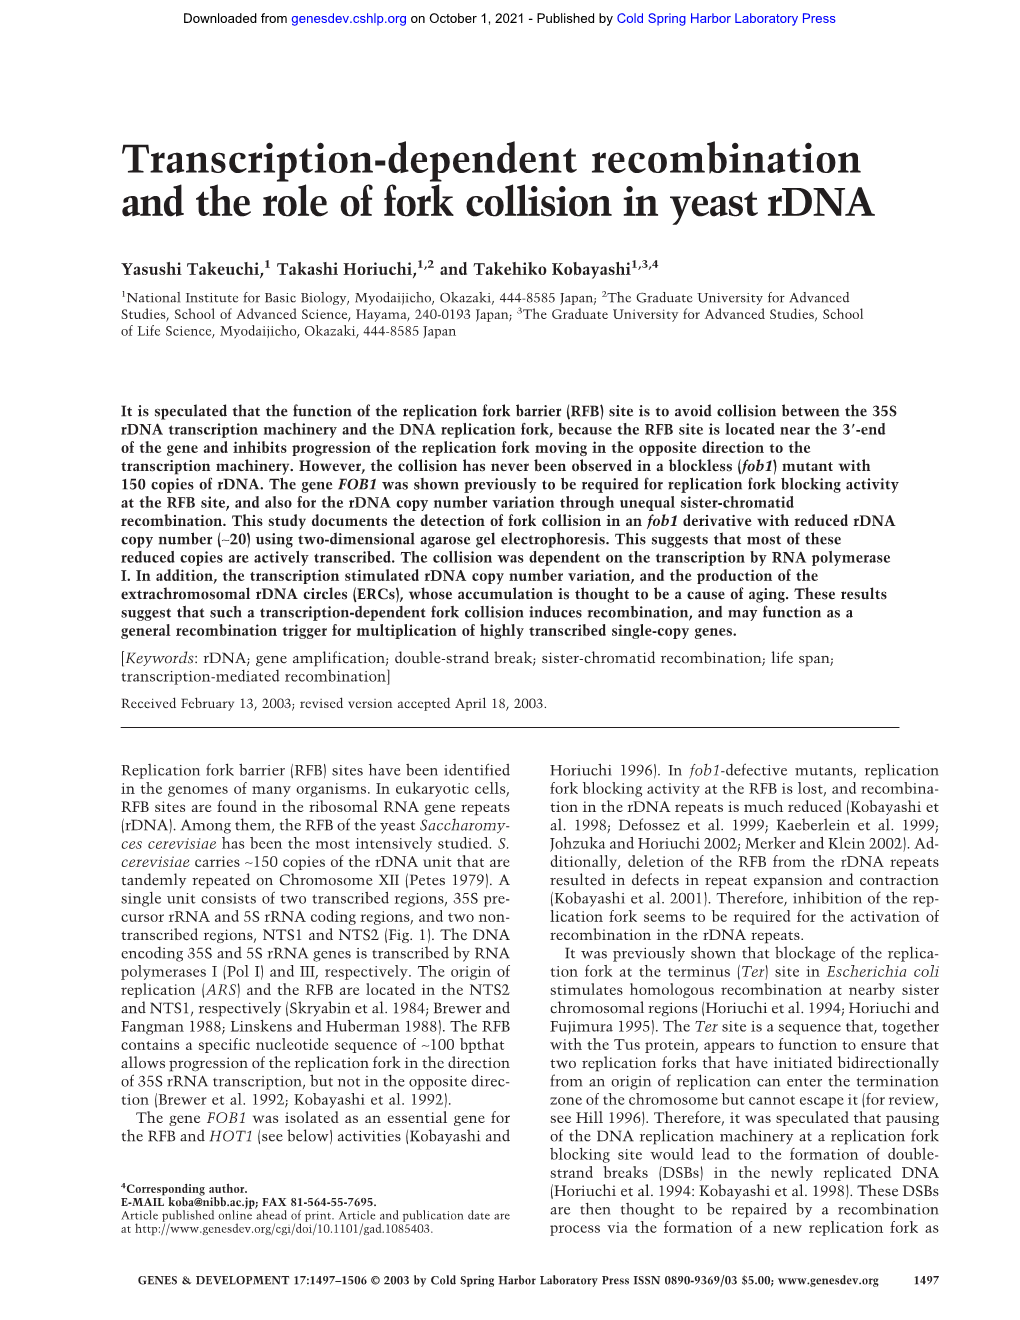 Transcription-Dependent Recombination and the Role of Fork Collision in Yeast Rdna